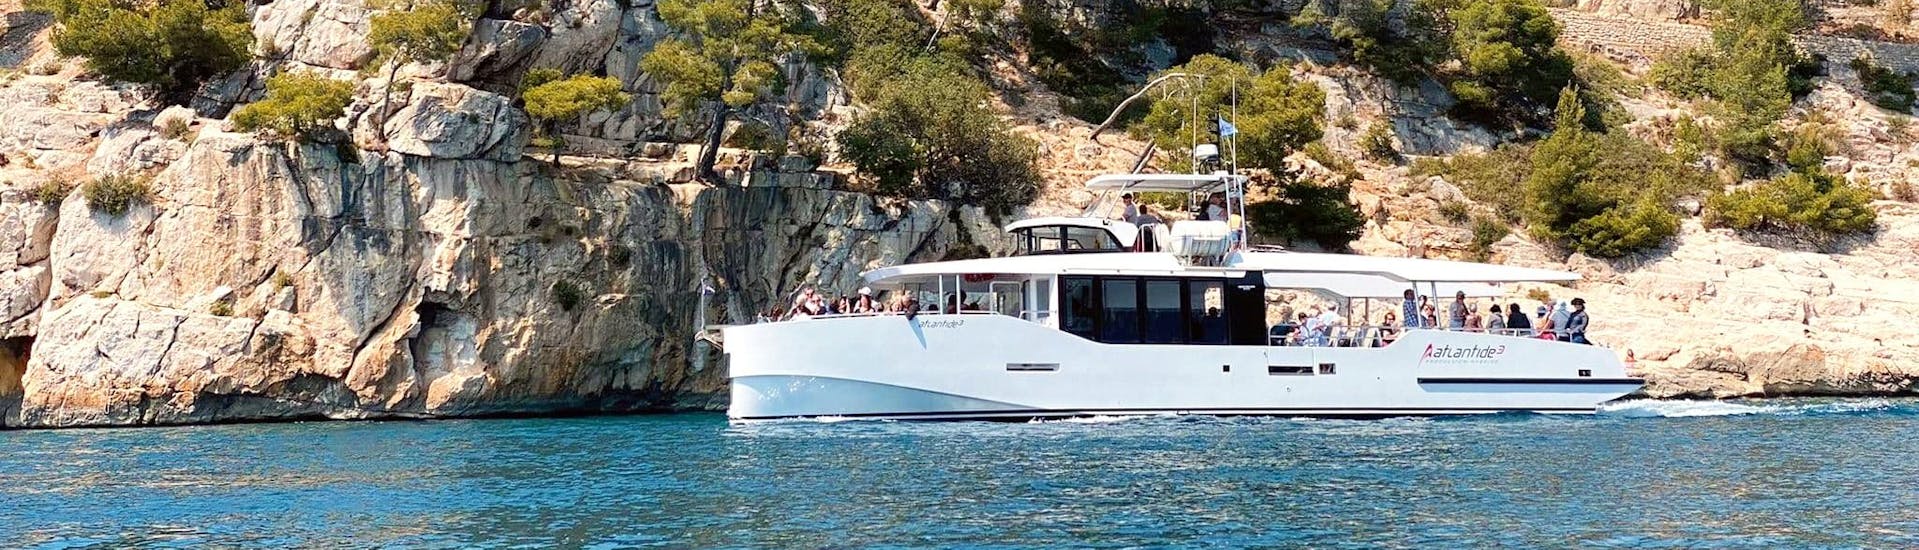 View of the boat going to the Calanques or to Porquerolles with Atlantide Promenades en mer Bandol.